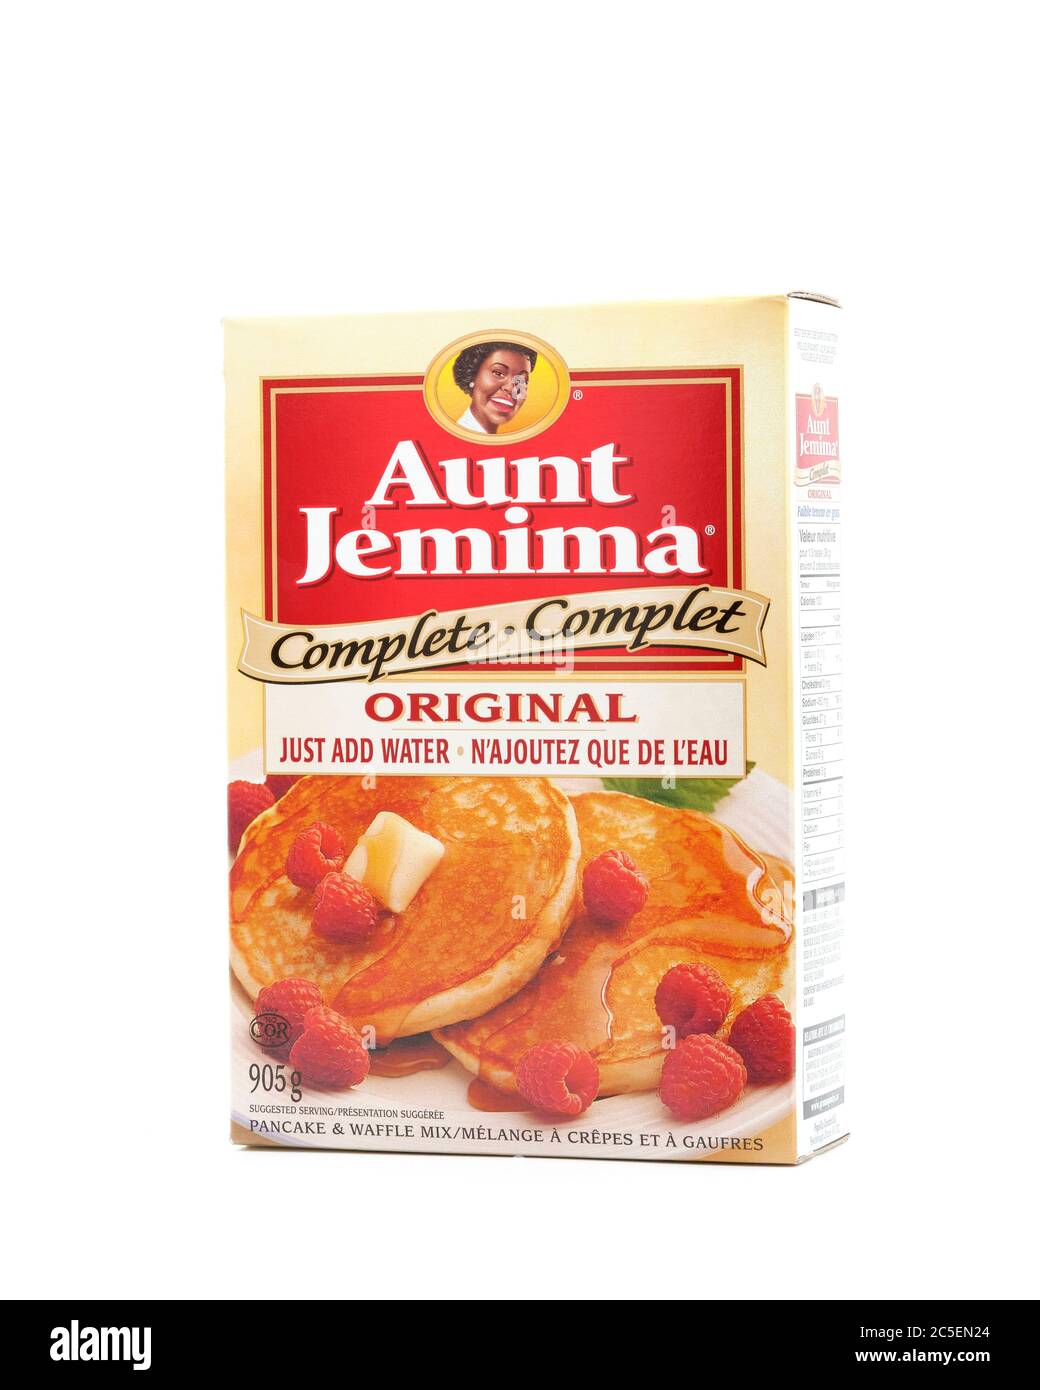 Quaker Oats a subsidiary or Pepsico is set to retire the 131 year old Aunt Jemima brand name after widespread protests against racism. Stock Photo